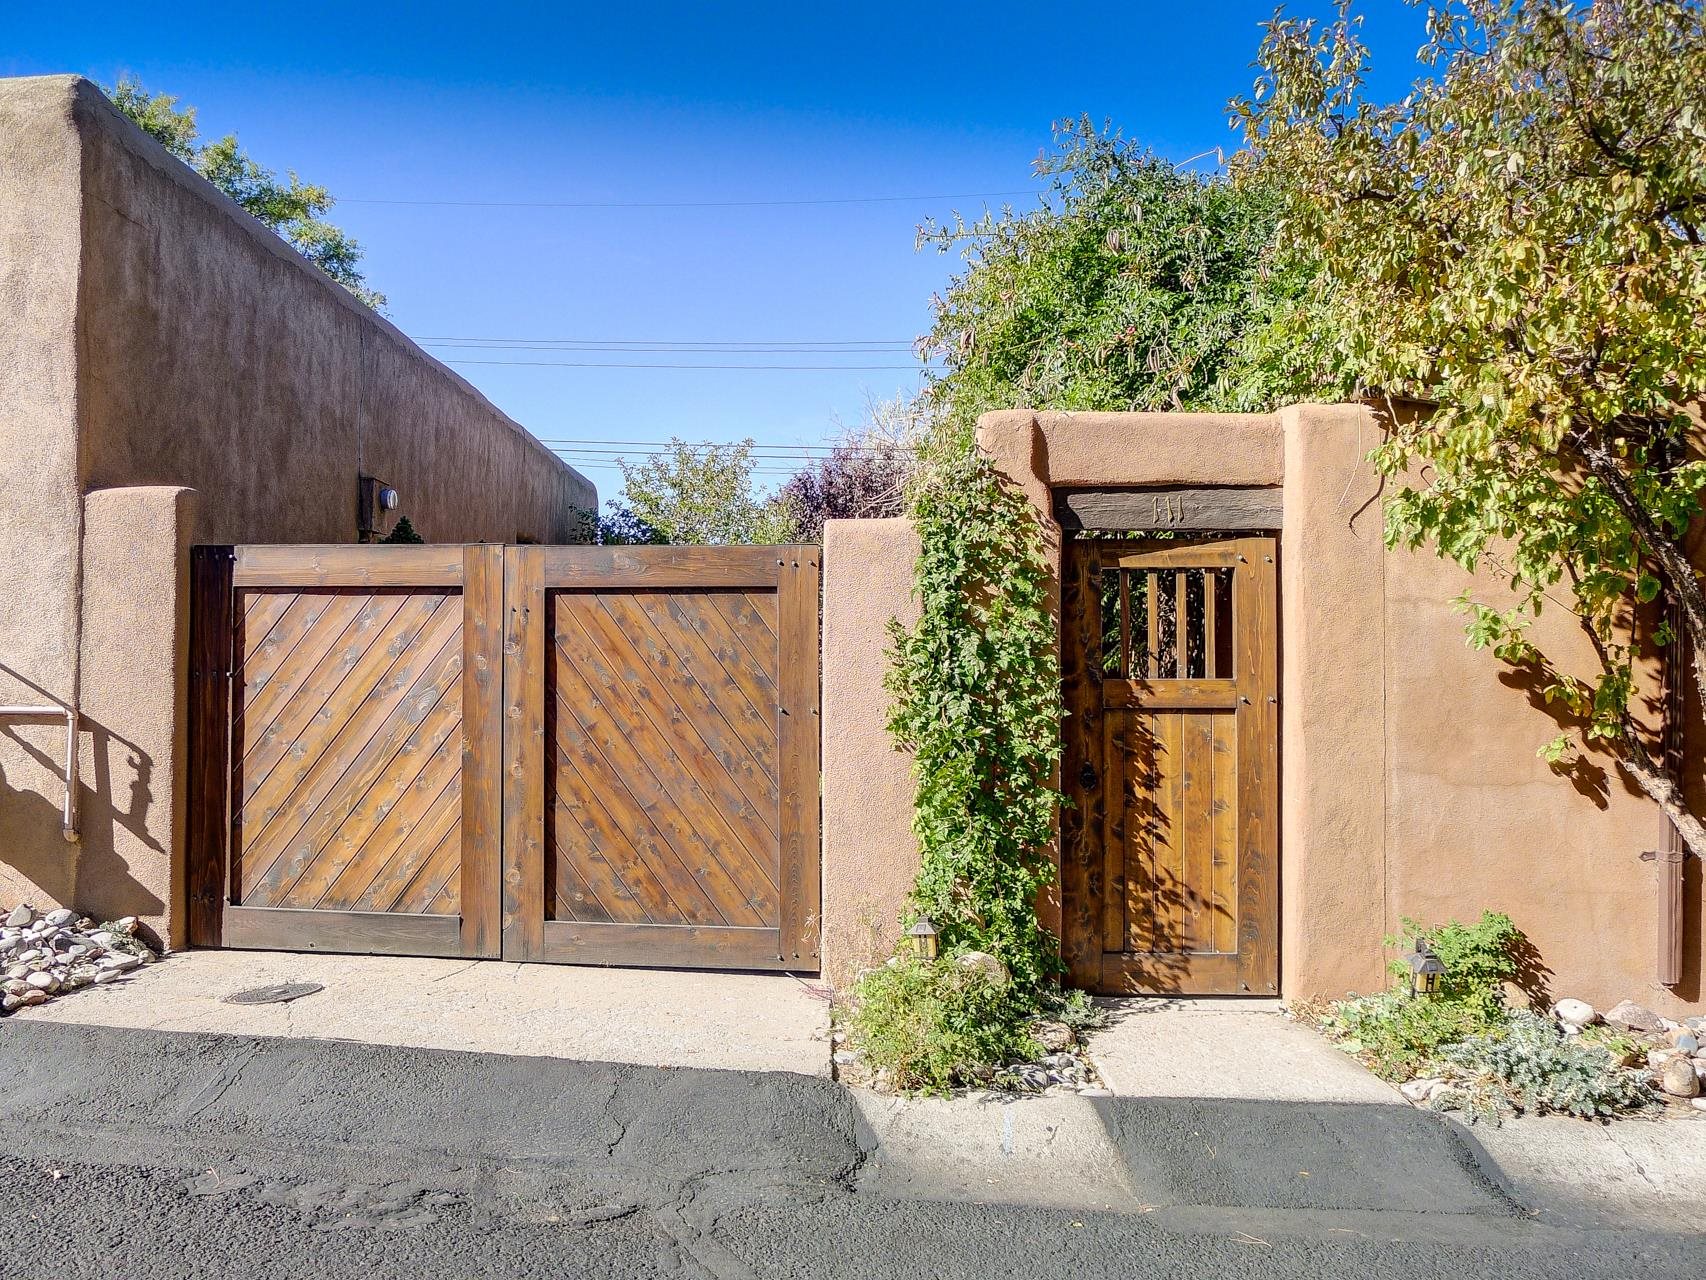 985 Agua Fria 111, Santa Fe, New Mexico 87501, 2 Bedrooms Bedrooms, ,1 BathroomBathrooms,Residential,For Sale,985 Agua Fria 111,202104673